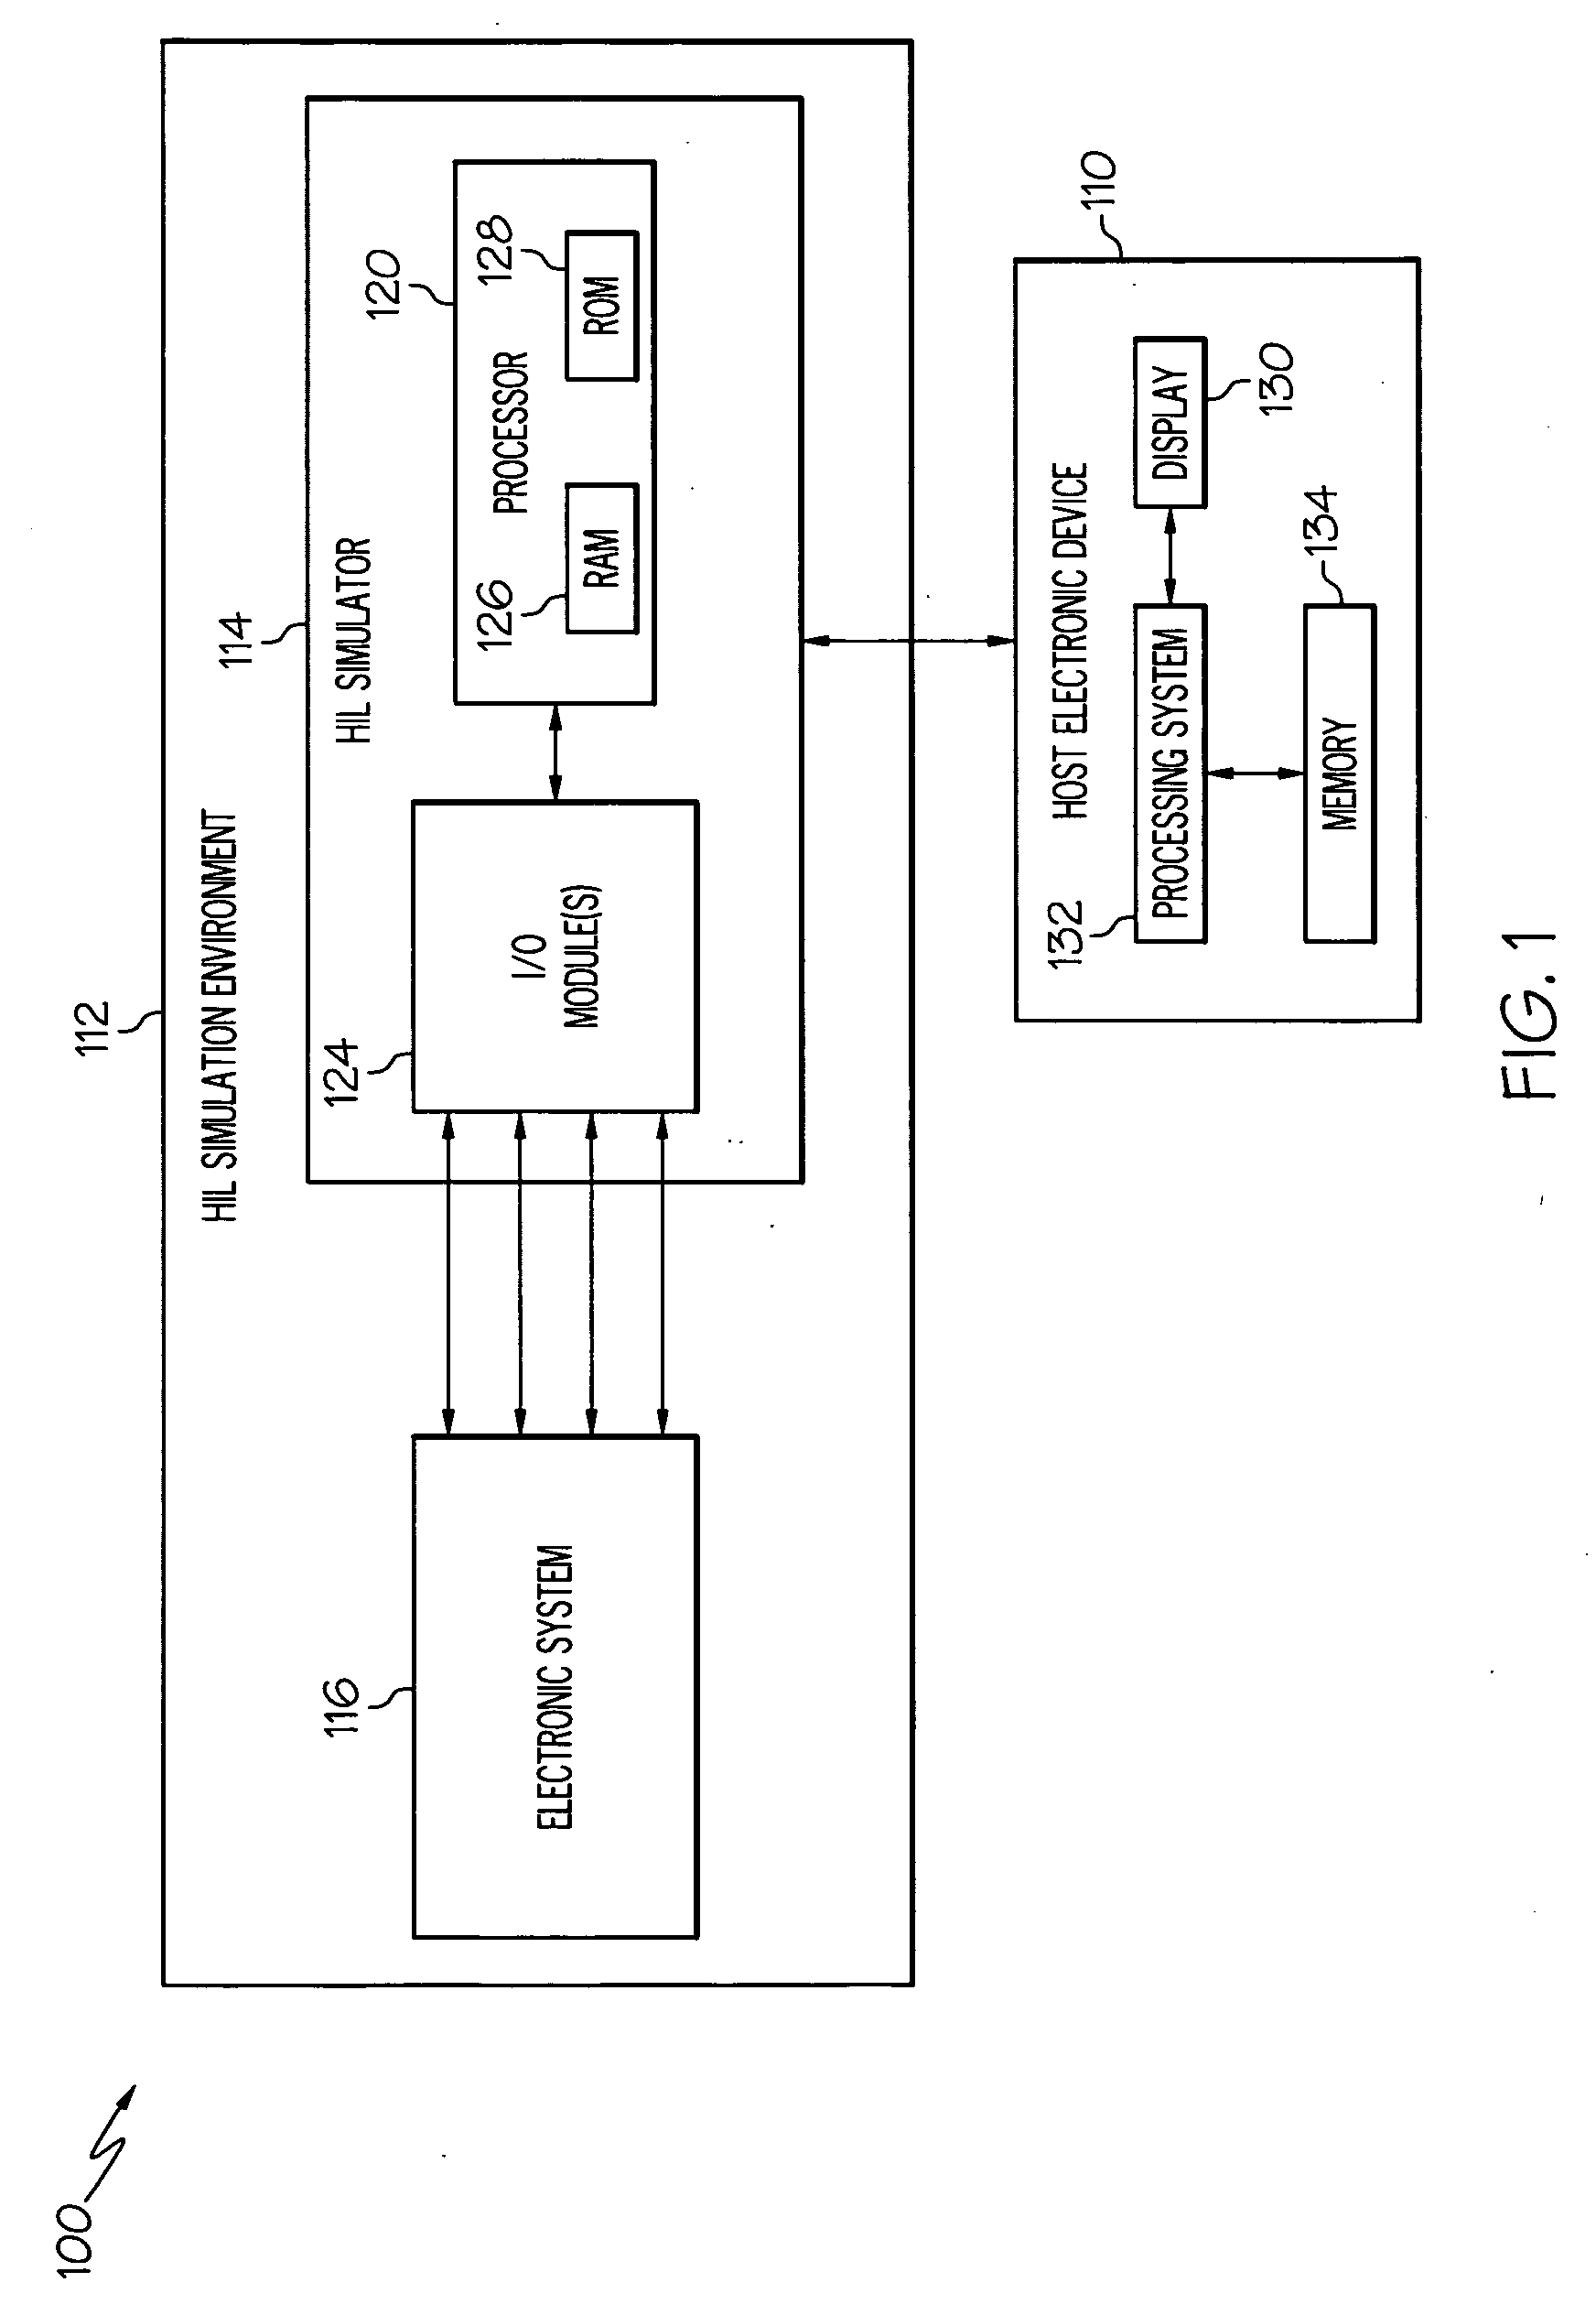 System and apparatus for managing test procedures within a hardware-in-the-loop simulation system